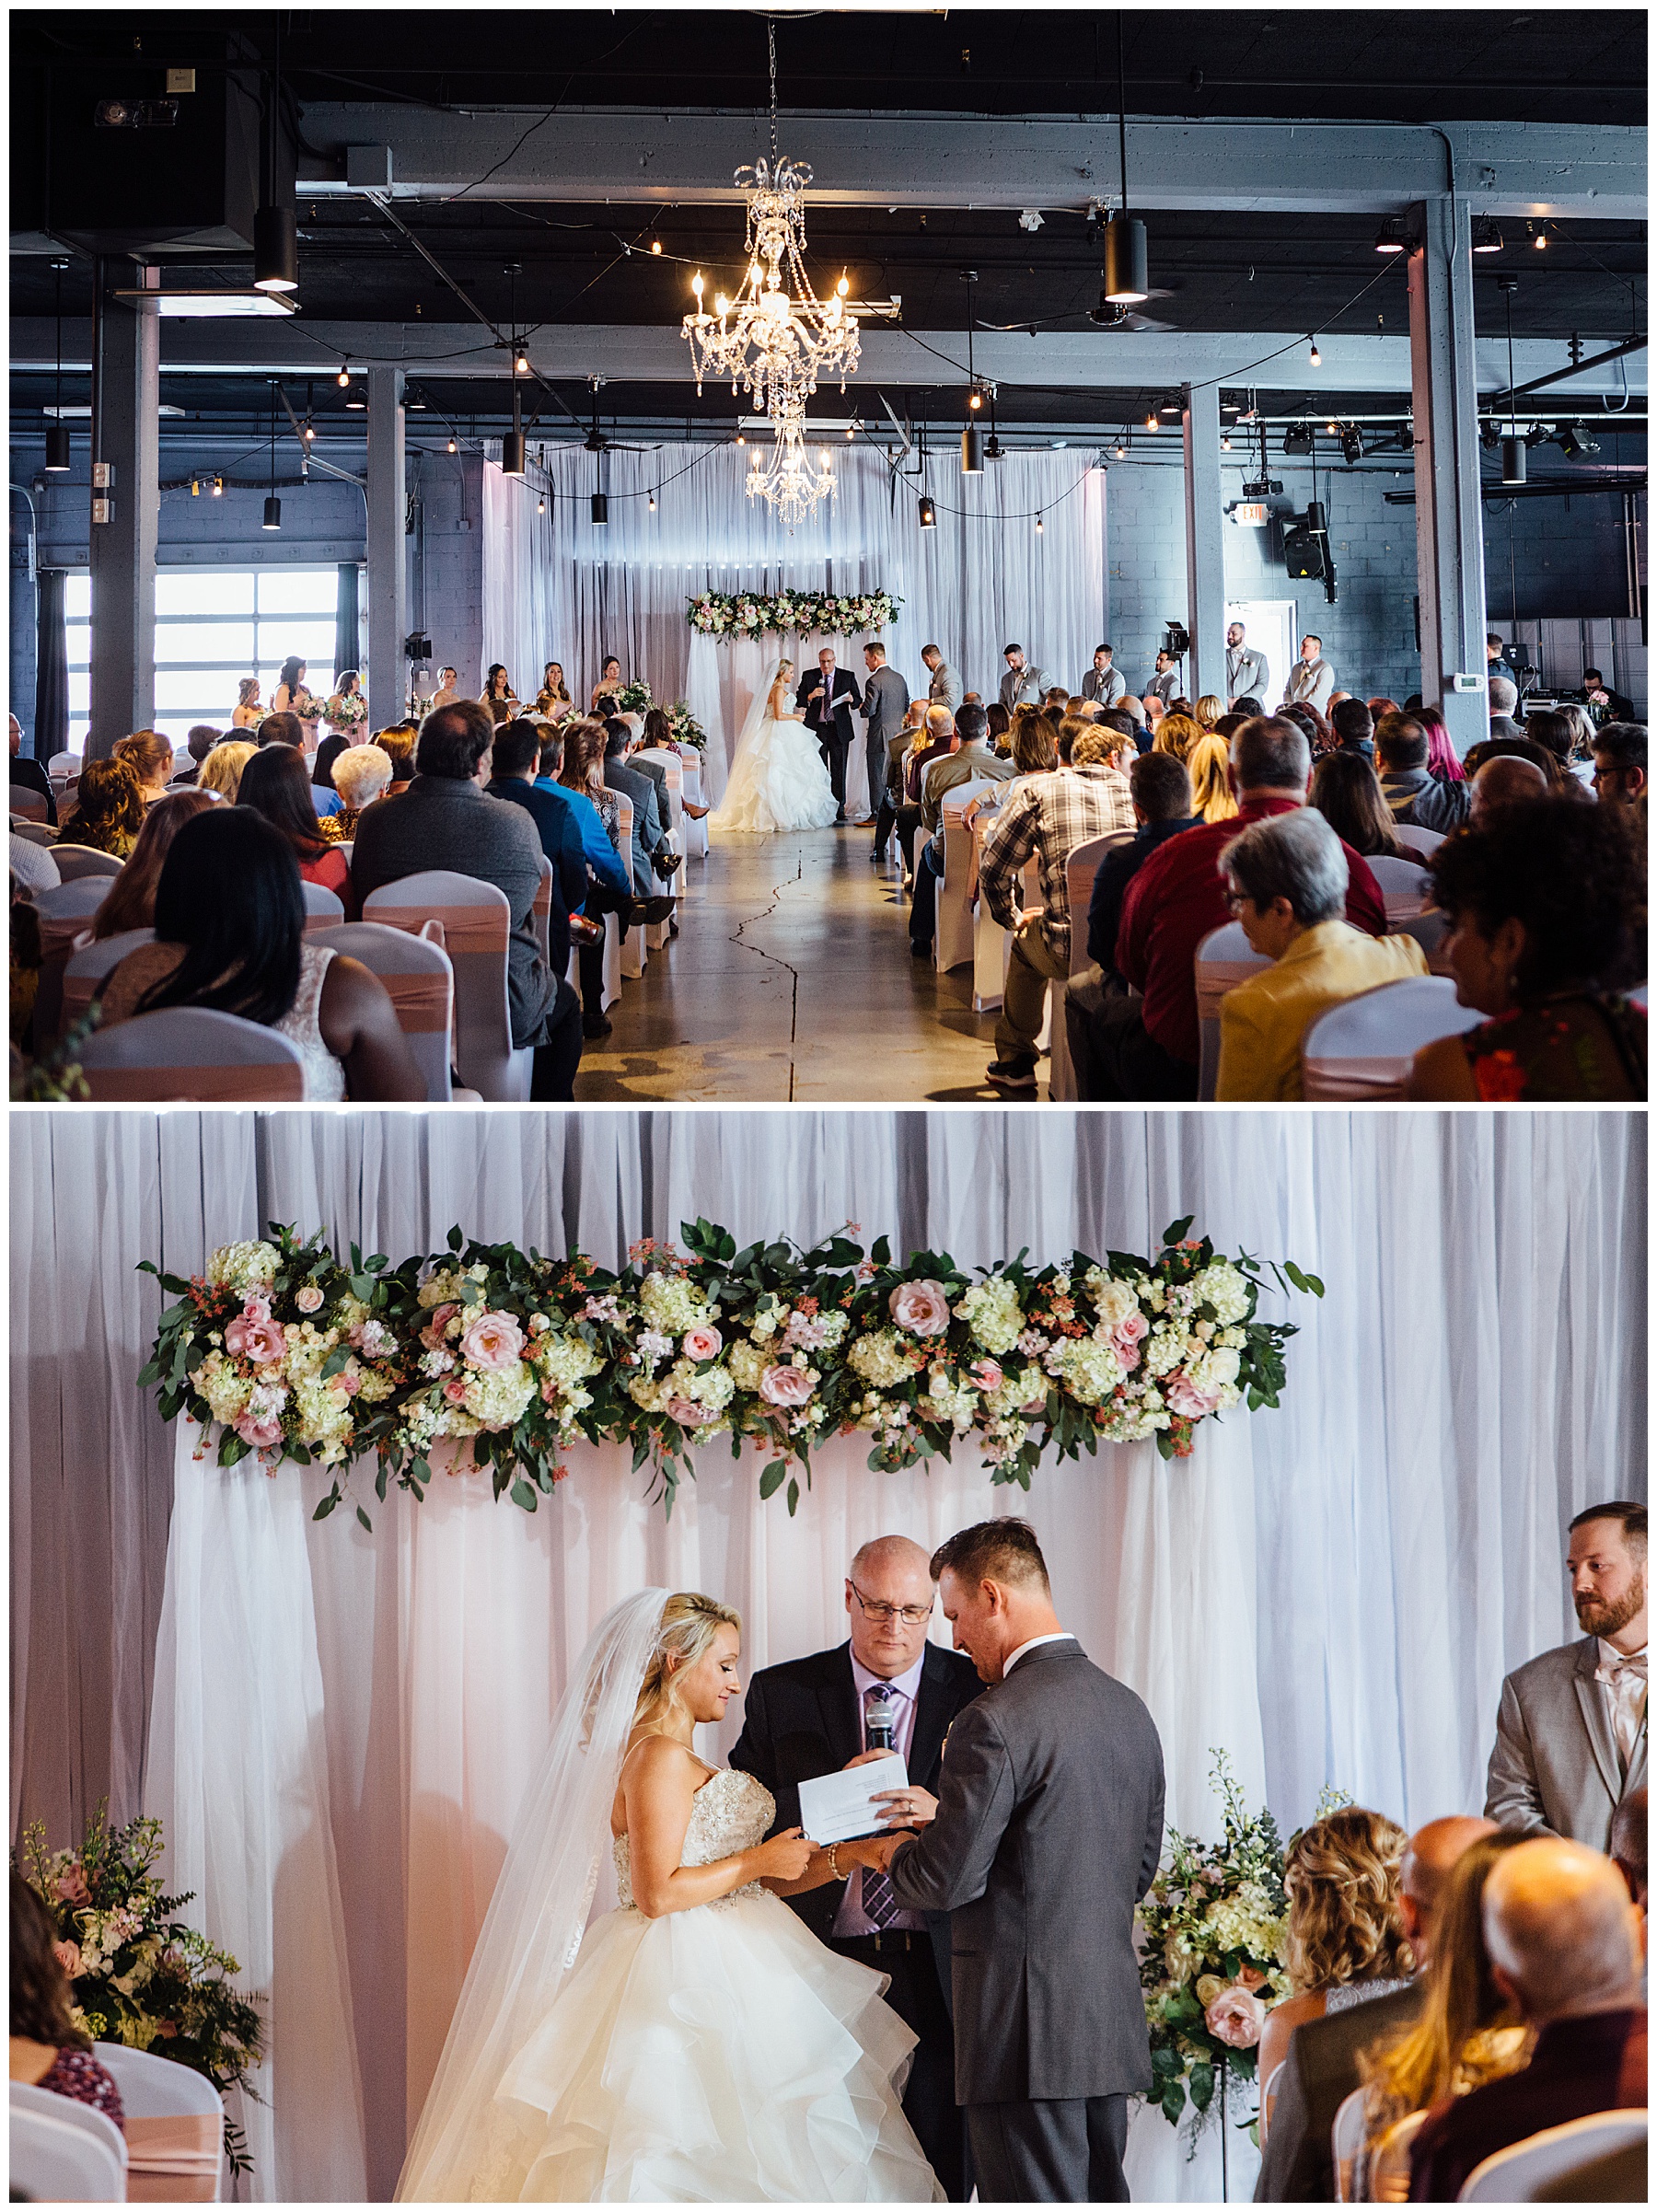 Ceremony Pictures at Diamond room Omaha